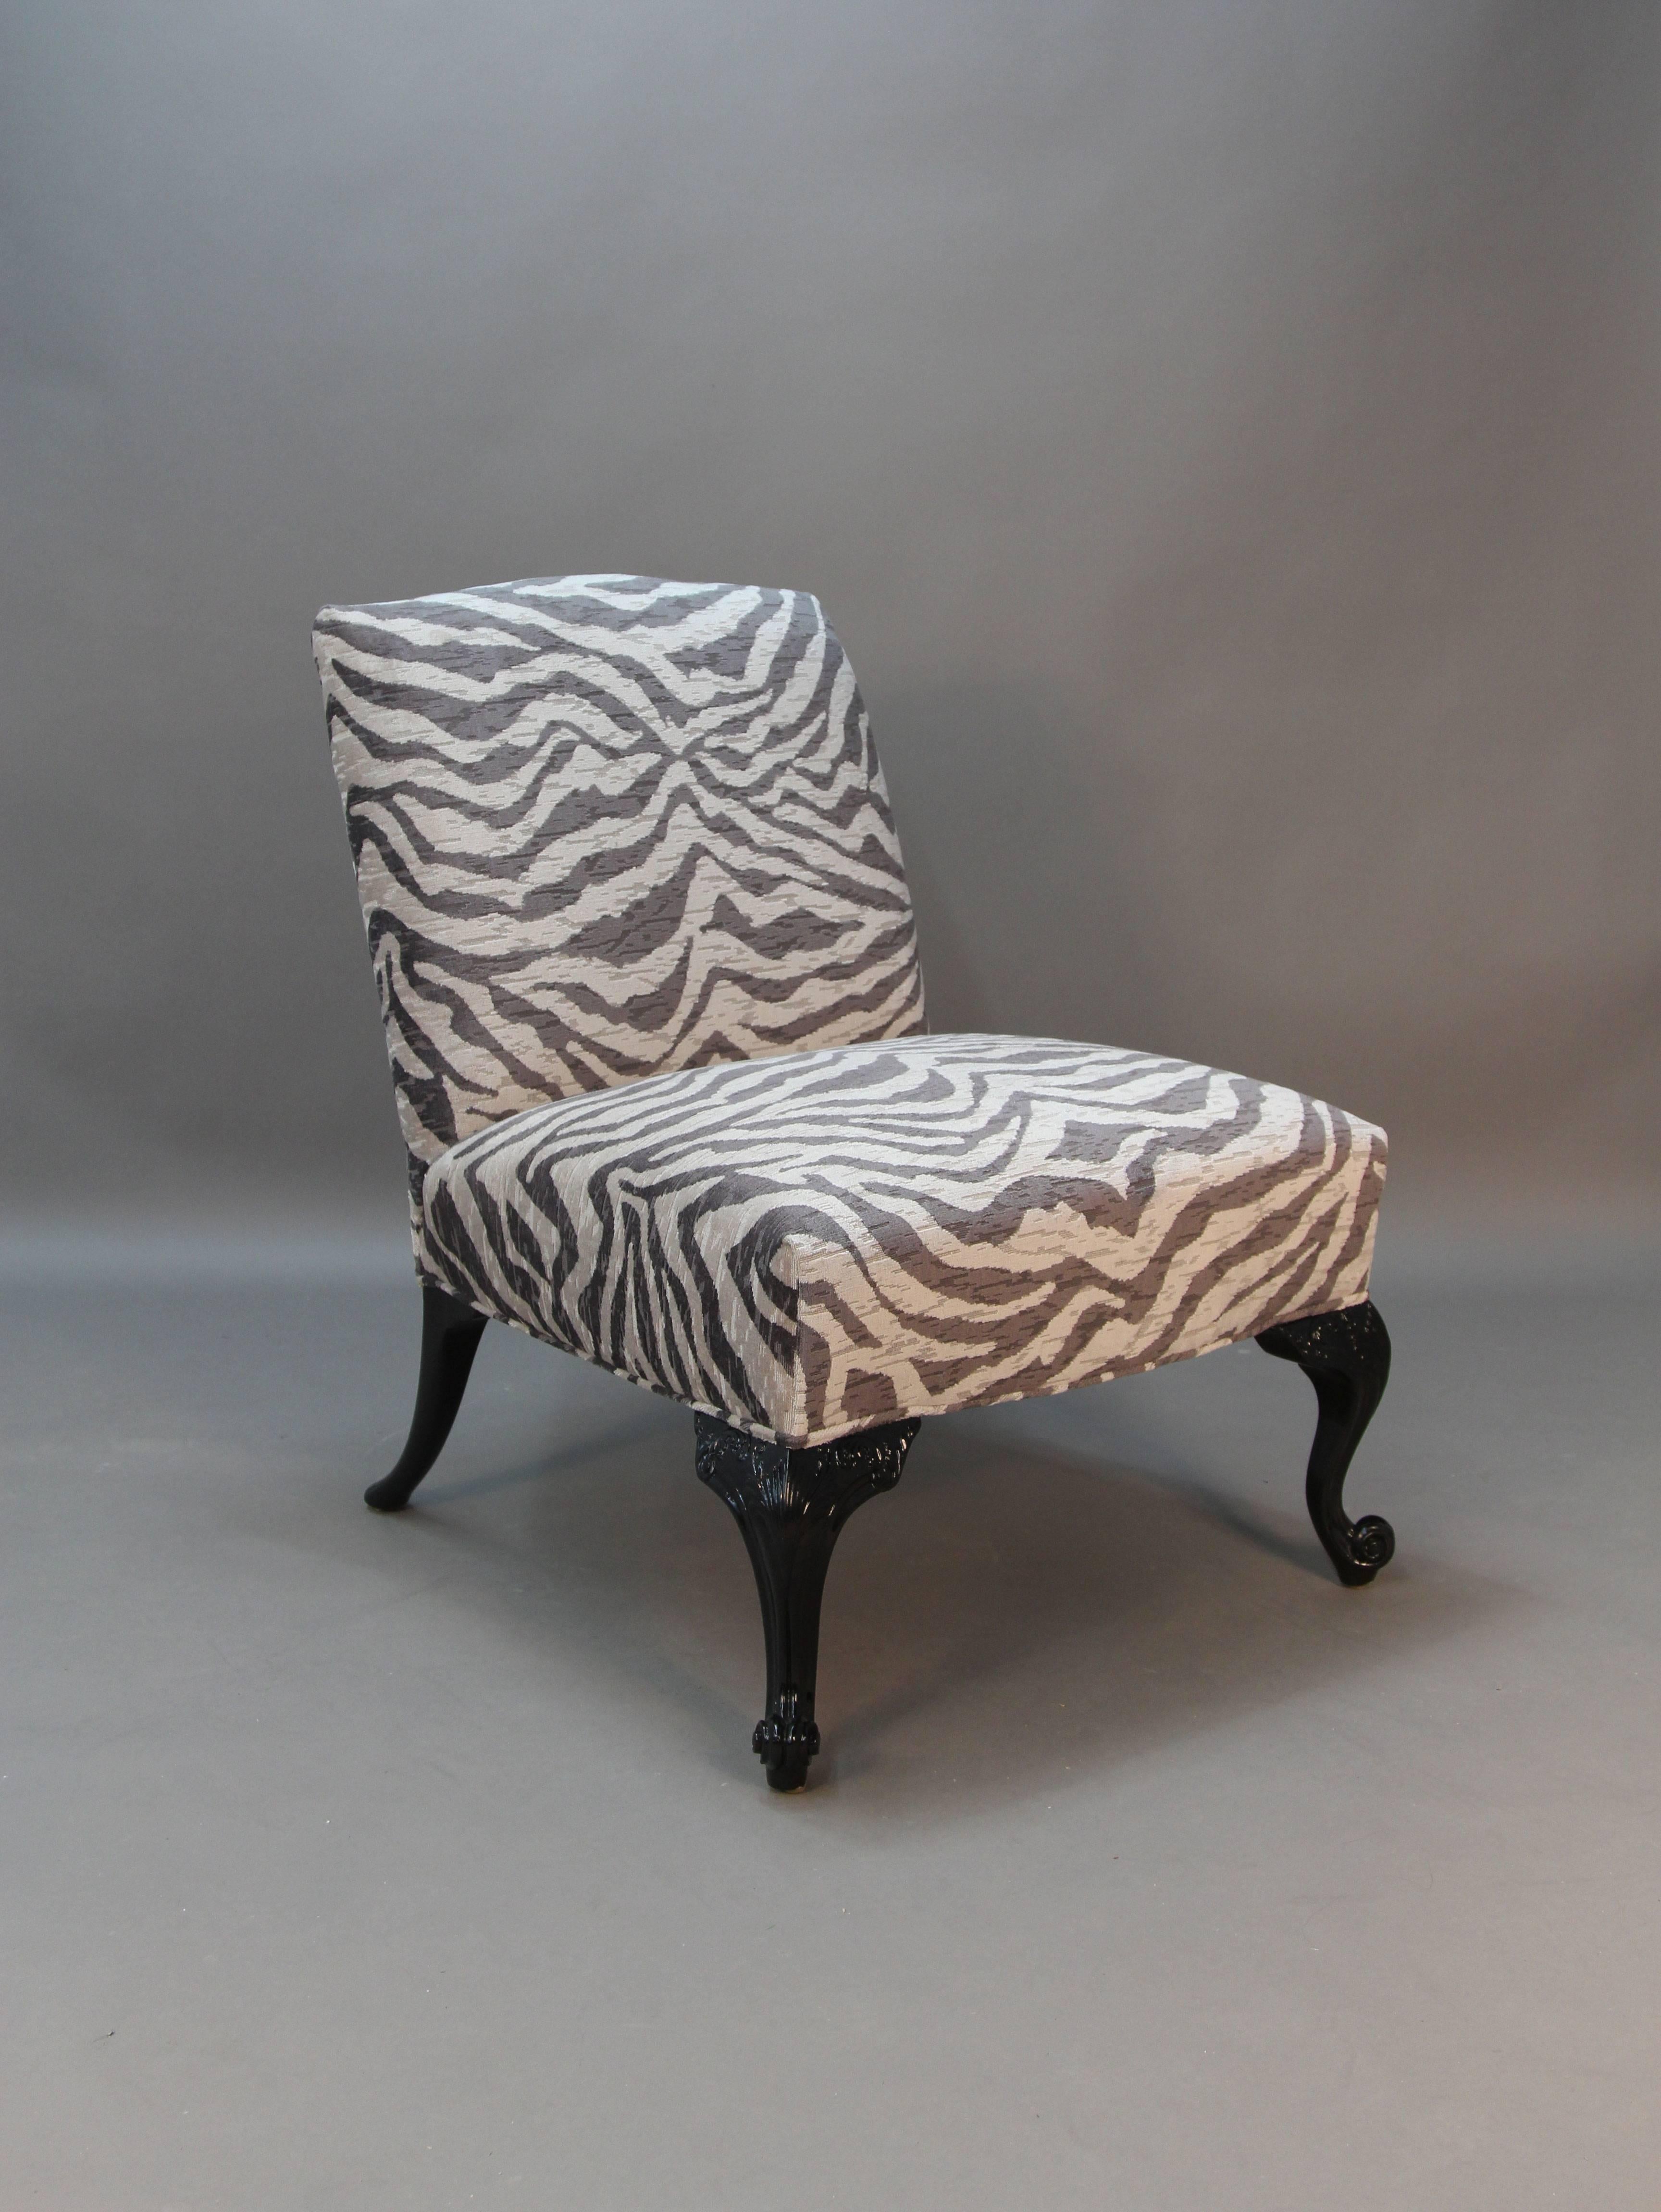 Newly Lacquered and Upholstered Traditional Slipper Chairs In Excellent Condition For Sale In Bridport, CT